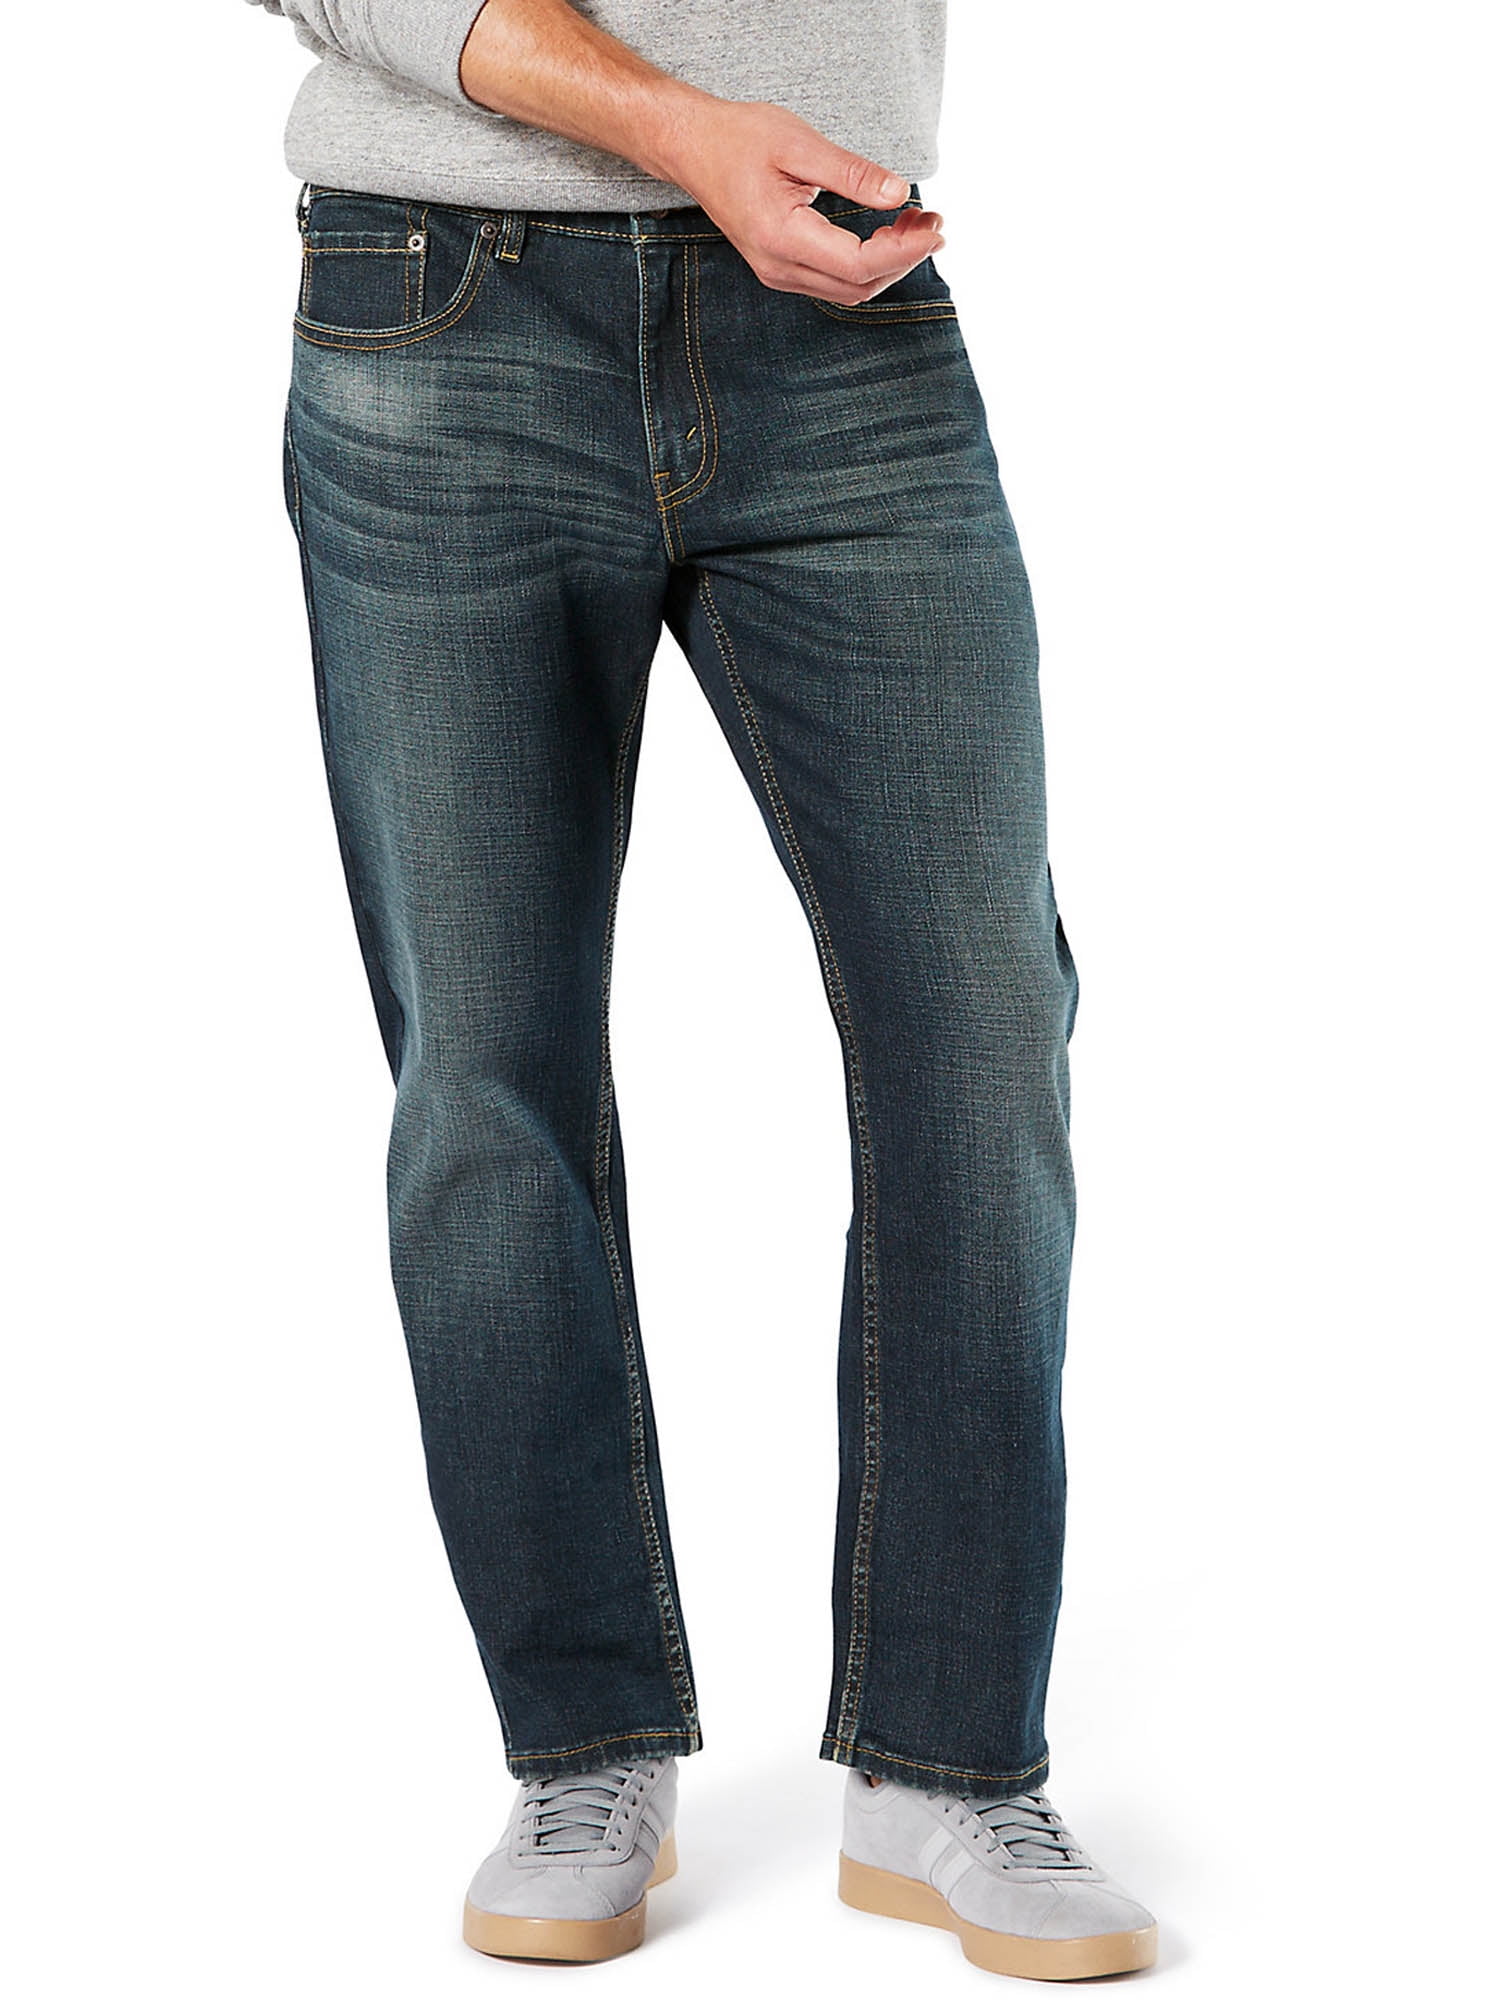 Signature by Levi Strauss & Co. Men's Relaxed Fit Jeans - Walmart.com